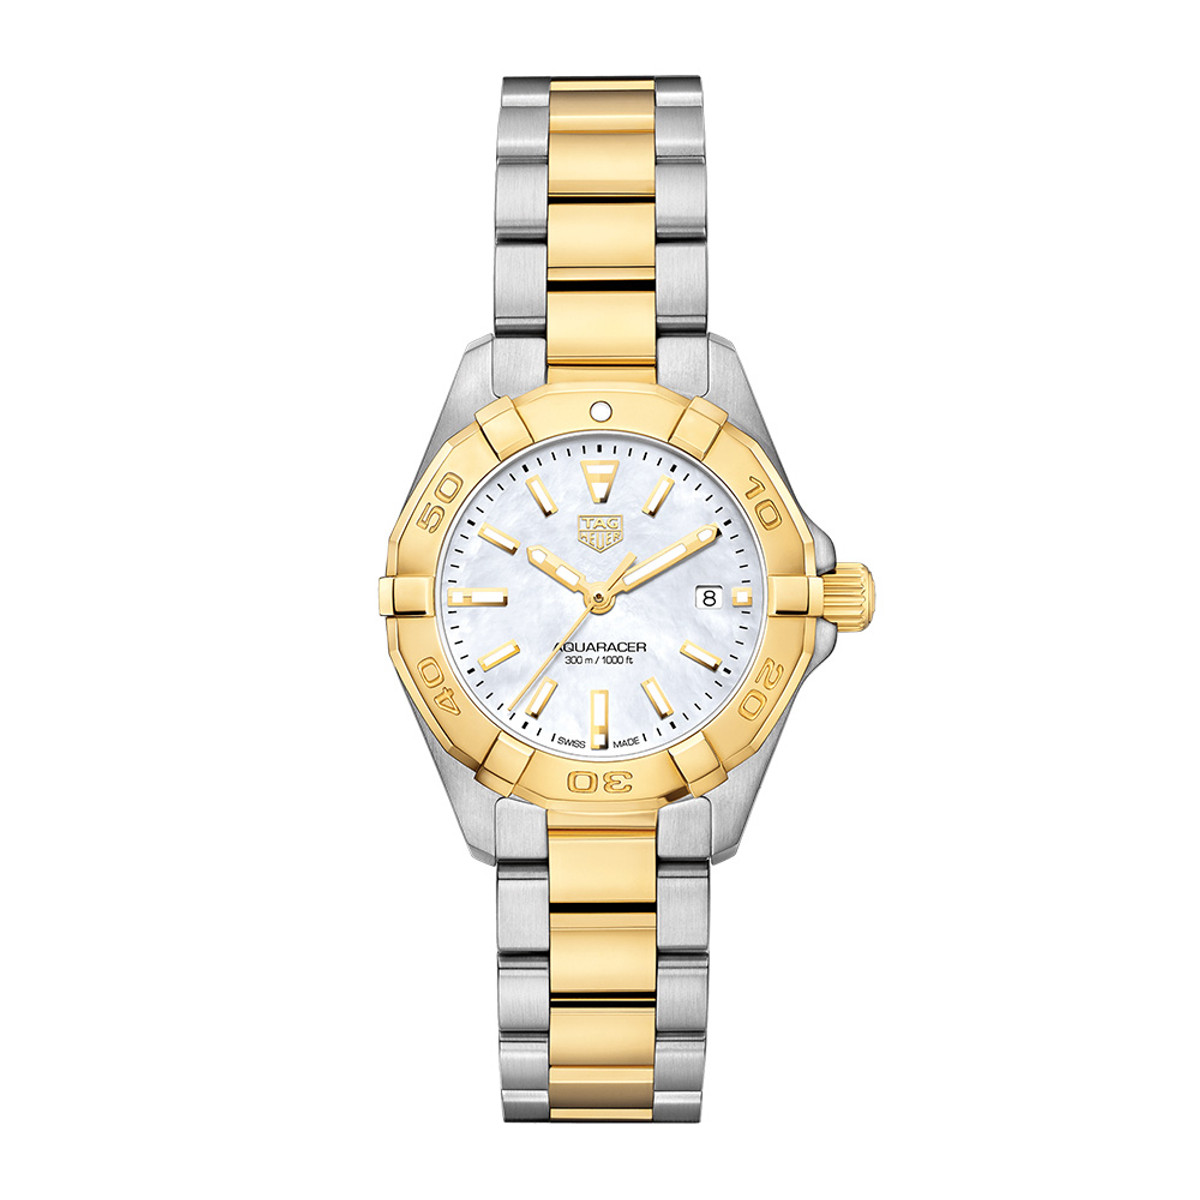 TAG Heuer Aquaracer 300M Stainless Steel & 18KT Yellow Gold 27MM Mother-Of-Pearl Dial Watch Product Image